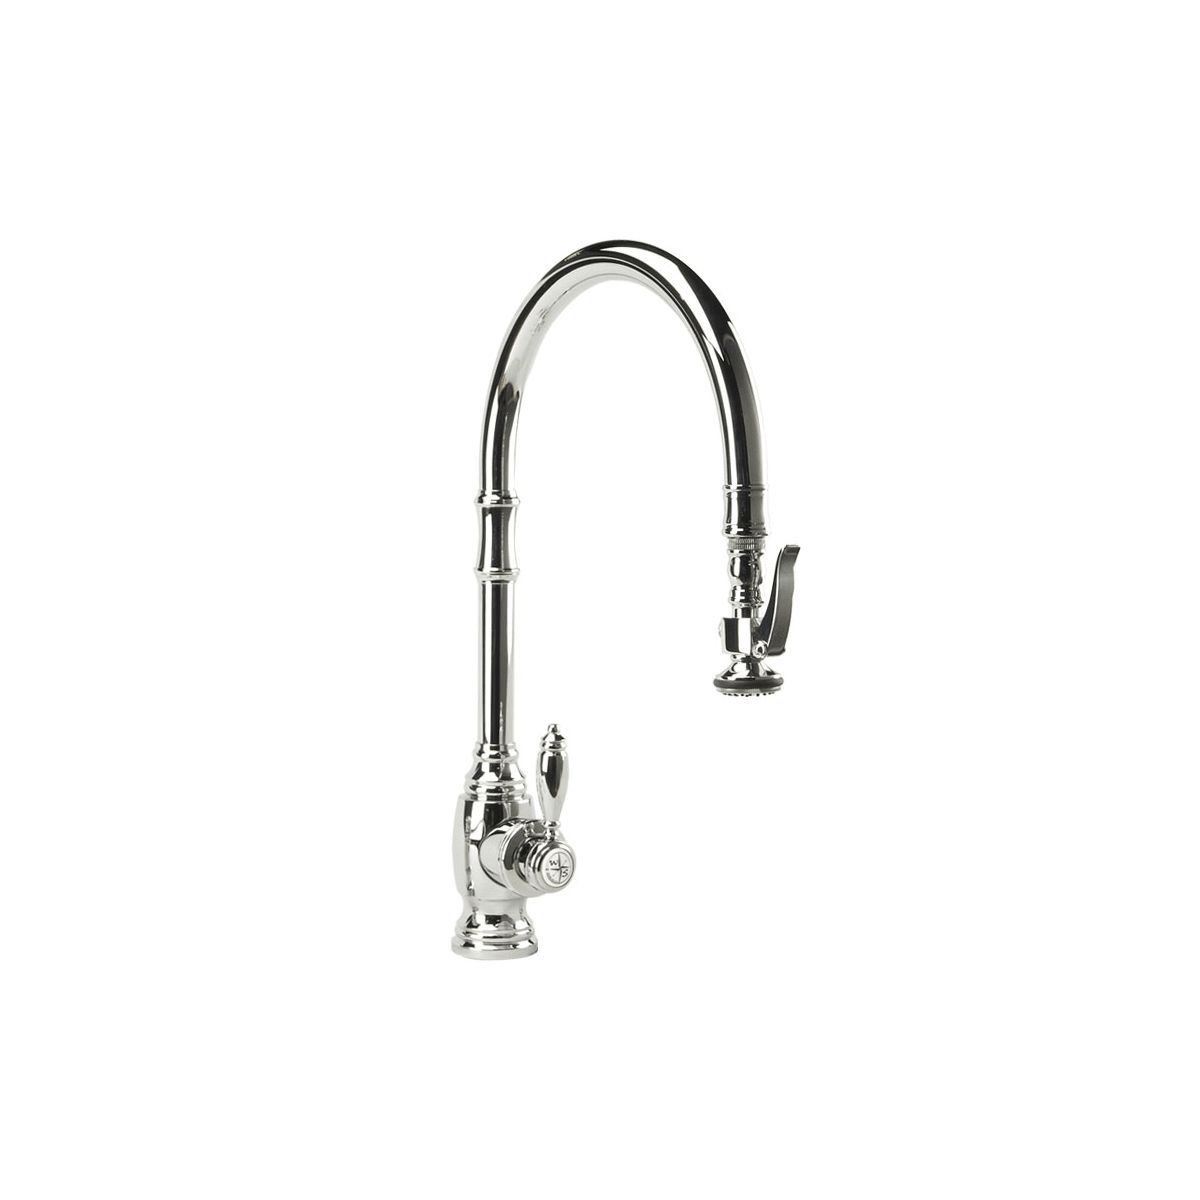 Traditional 1.75 GPM Single Hole Pull Down Kitchen Faucet with Single Lever Handle | Build.com, Inc.